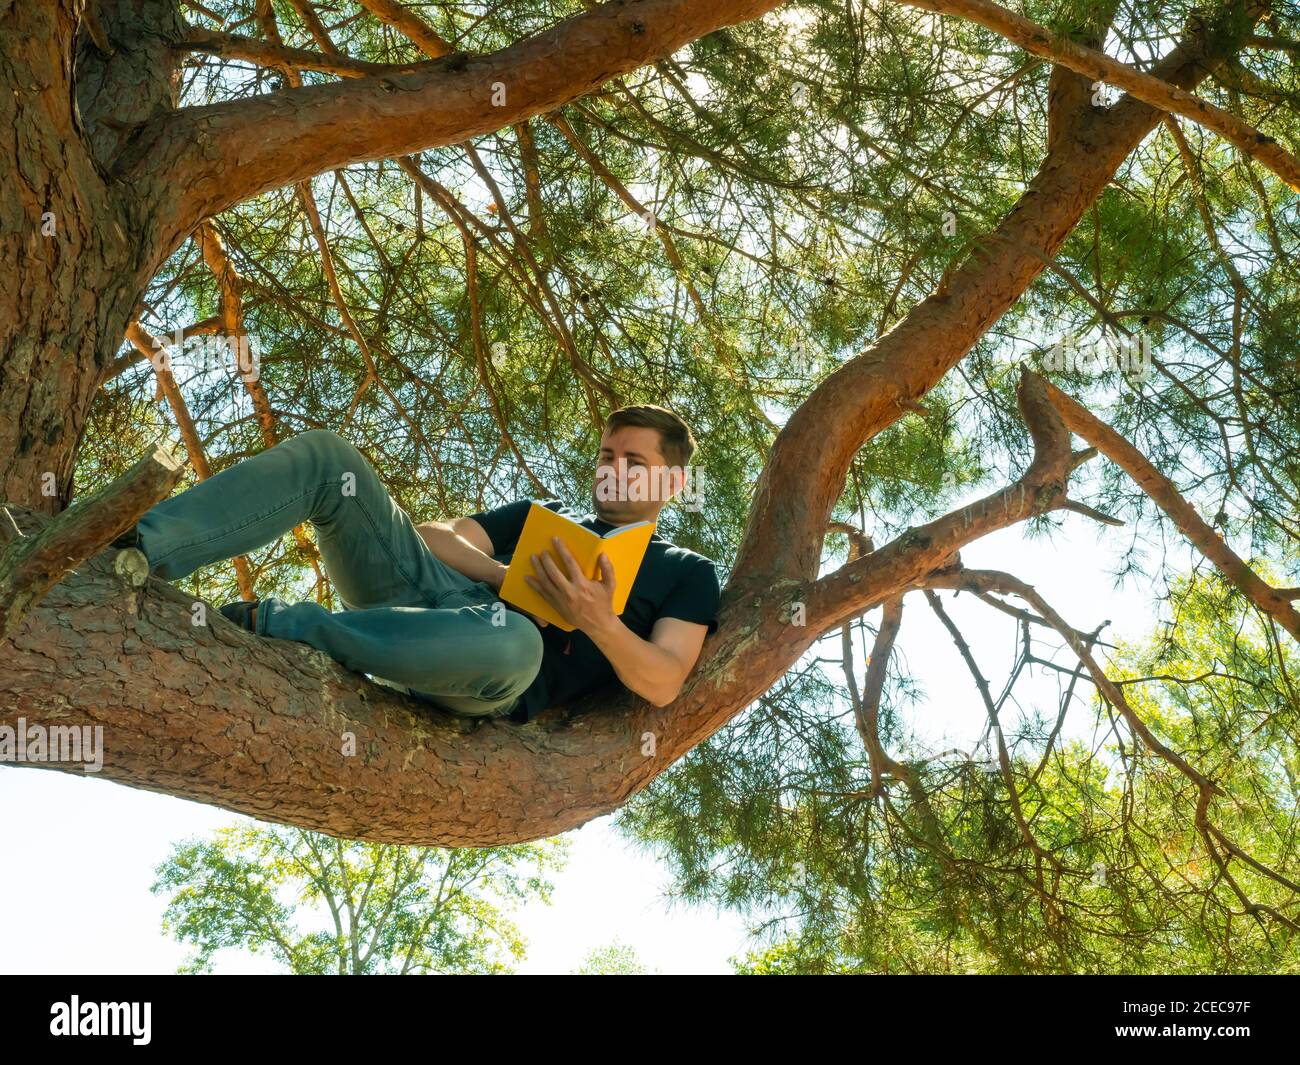 A man sits on a fir branch and reads a book. Summer outdoor recreation and relaxation. Stock Photo